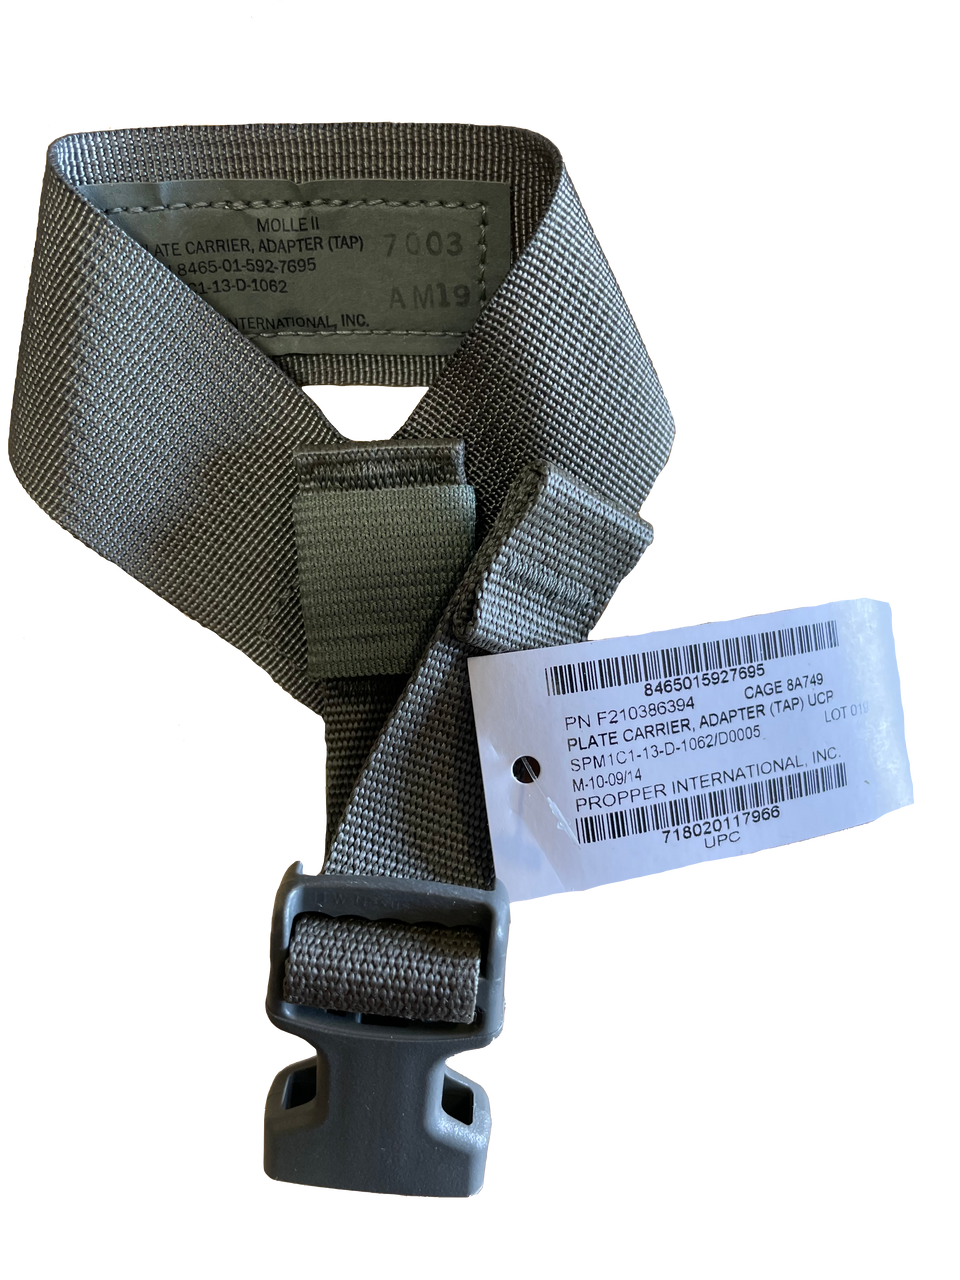 MOLLE II UCP TAP Adapter Plate Carrier Foliage Green - Army Surplus ...